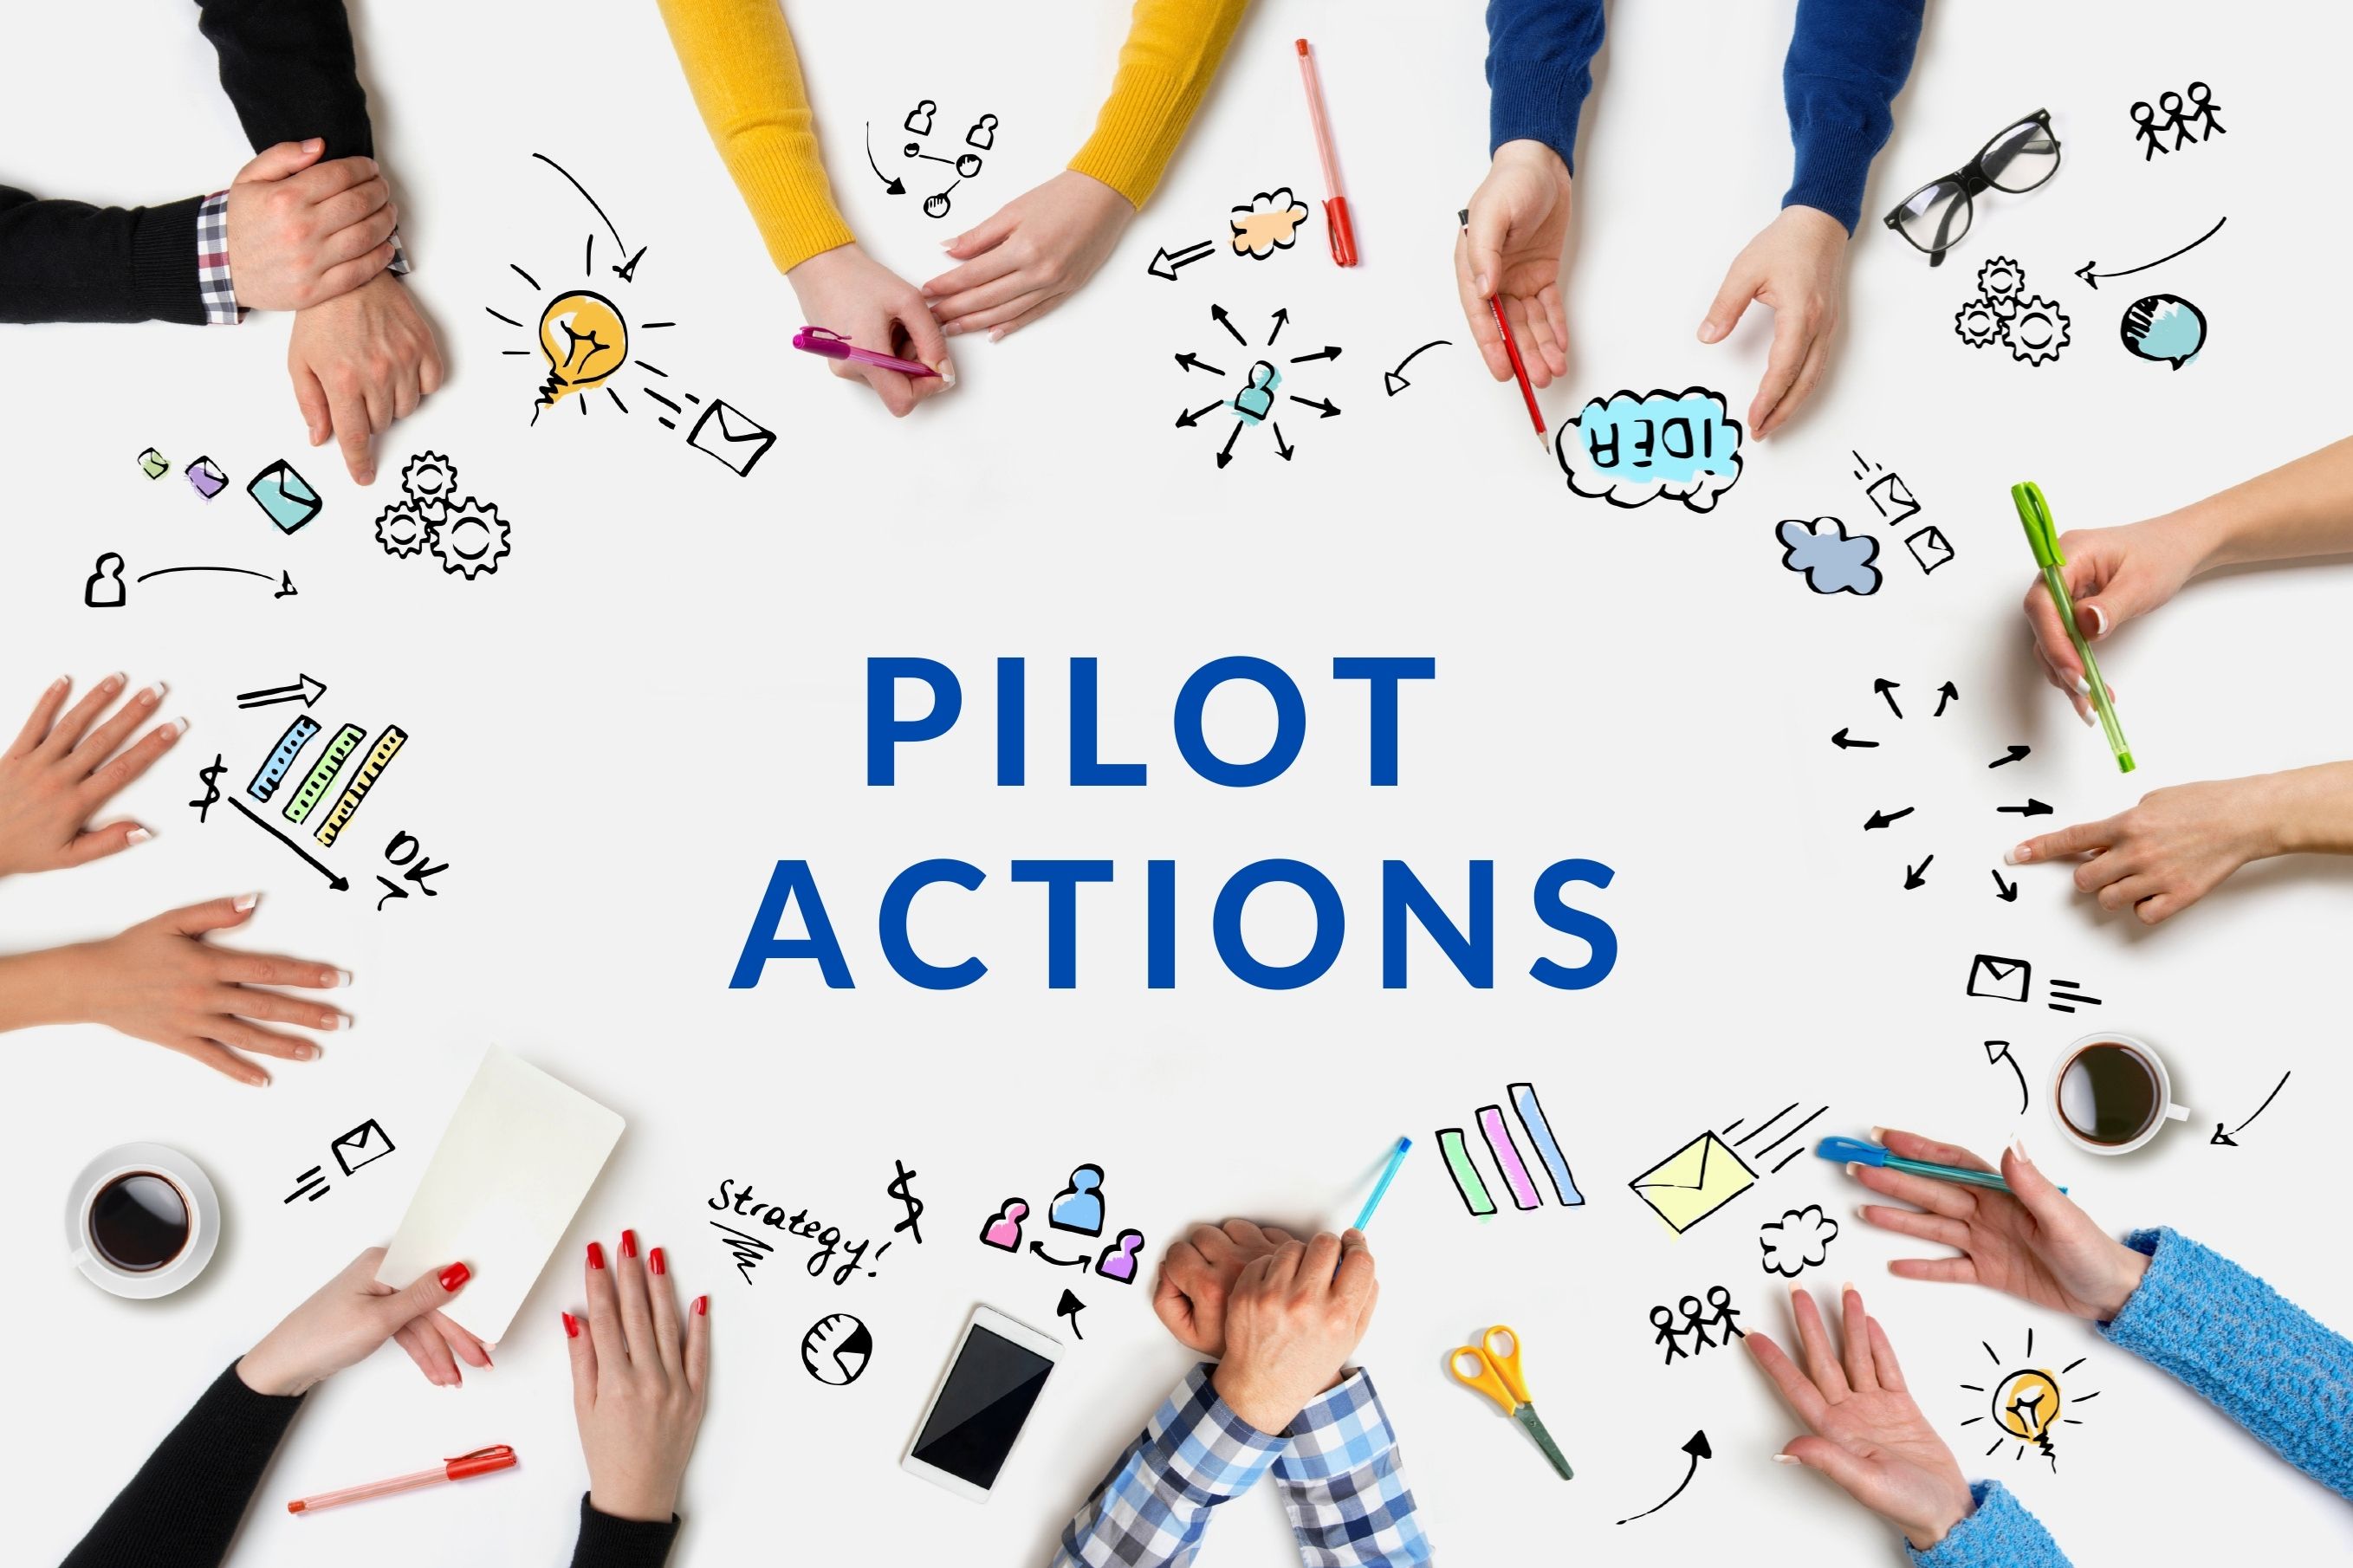 Great news for WaVE: 2 Pilots have been approved!